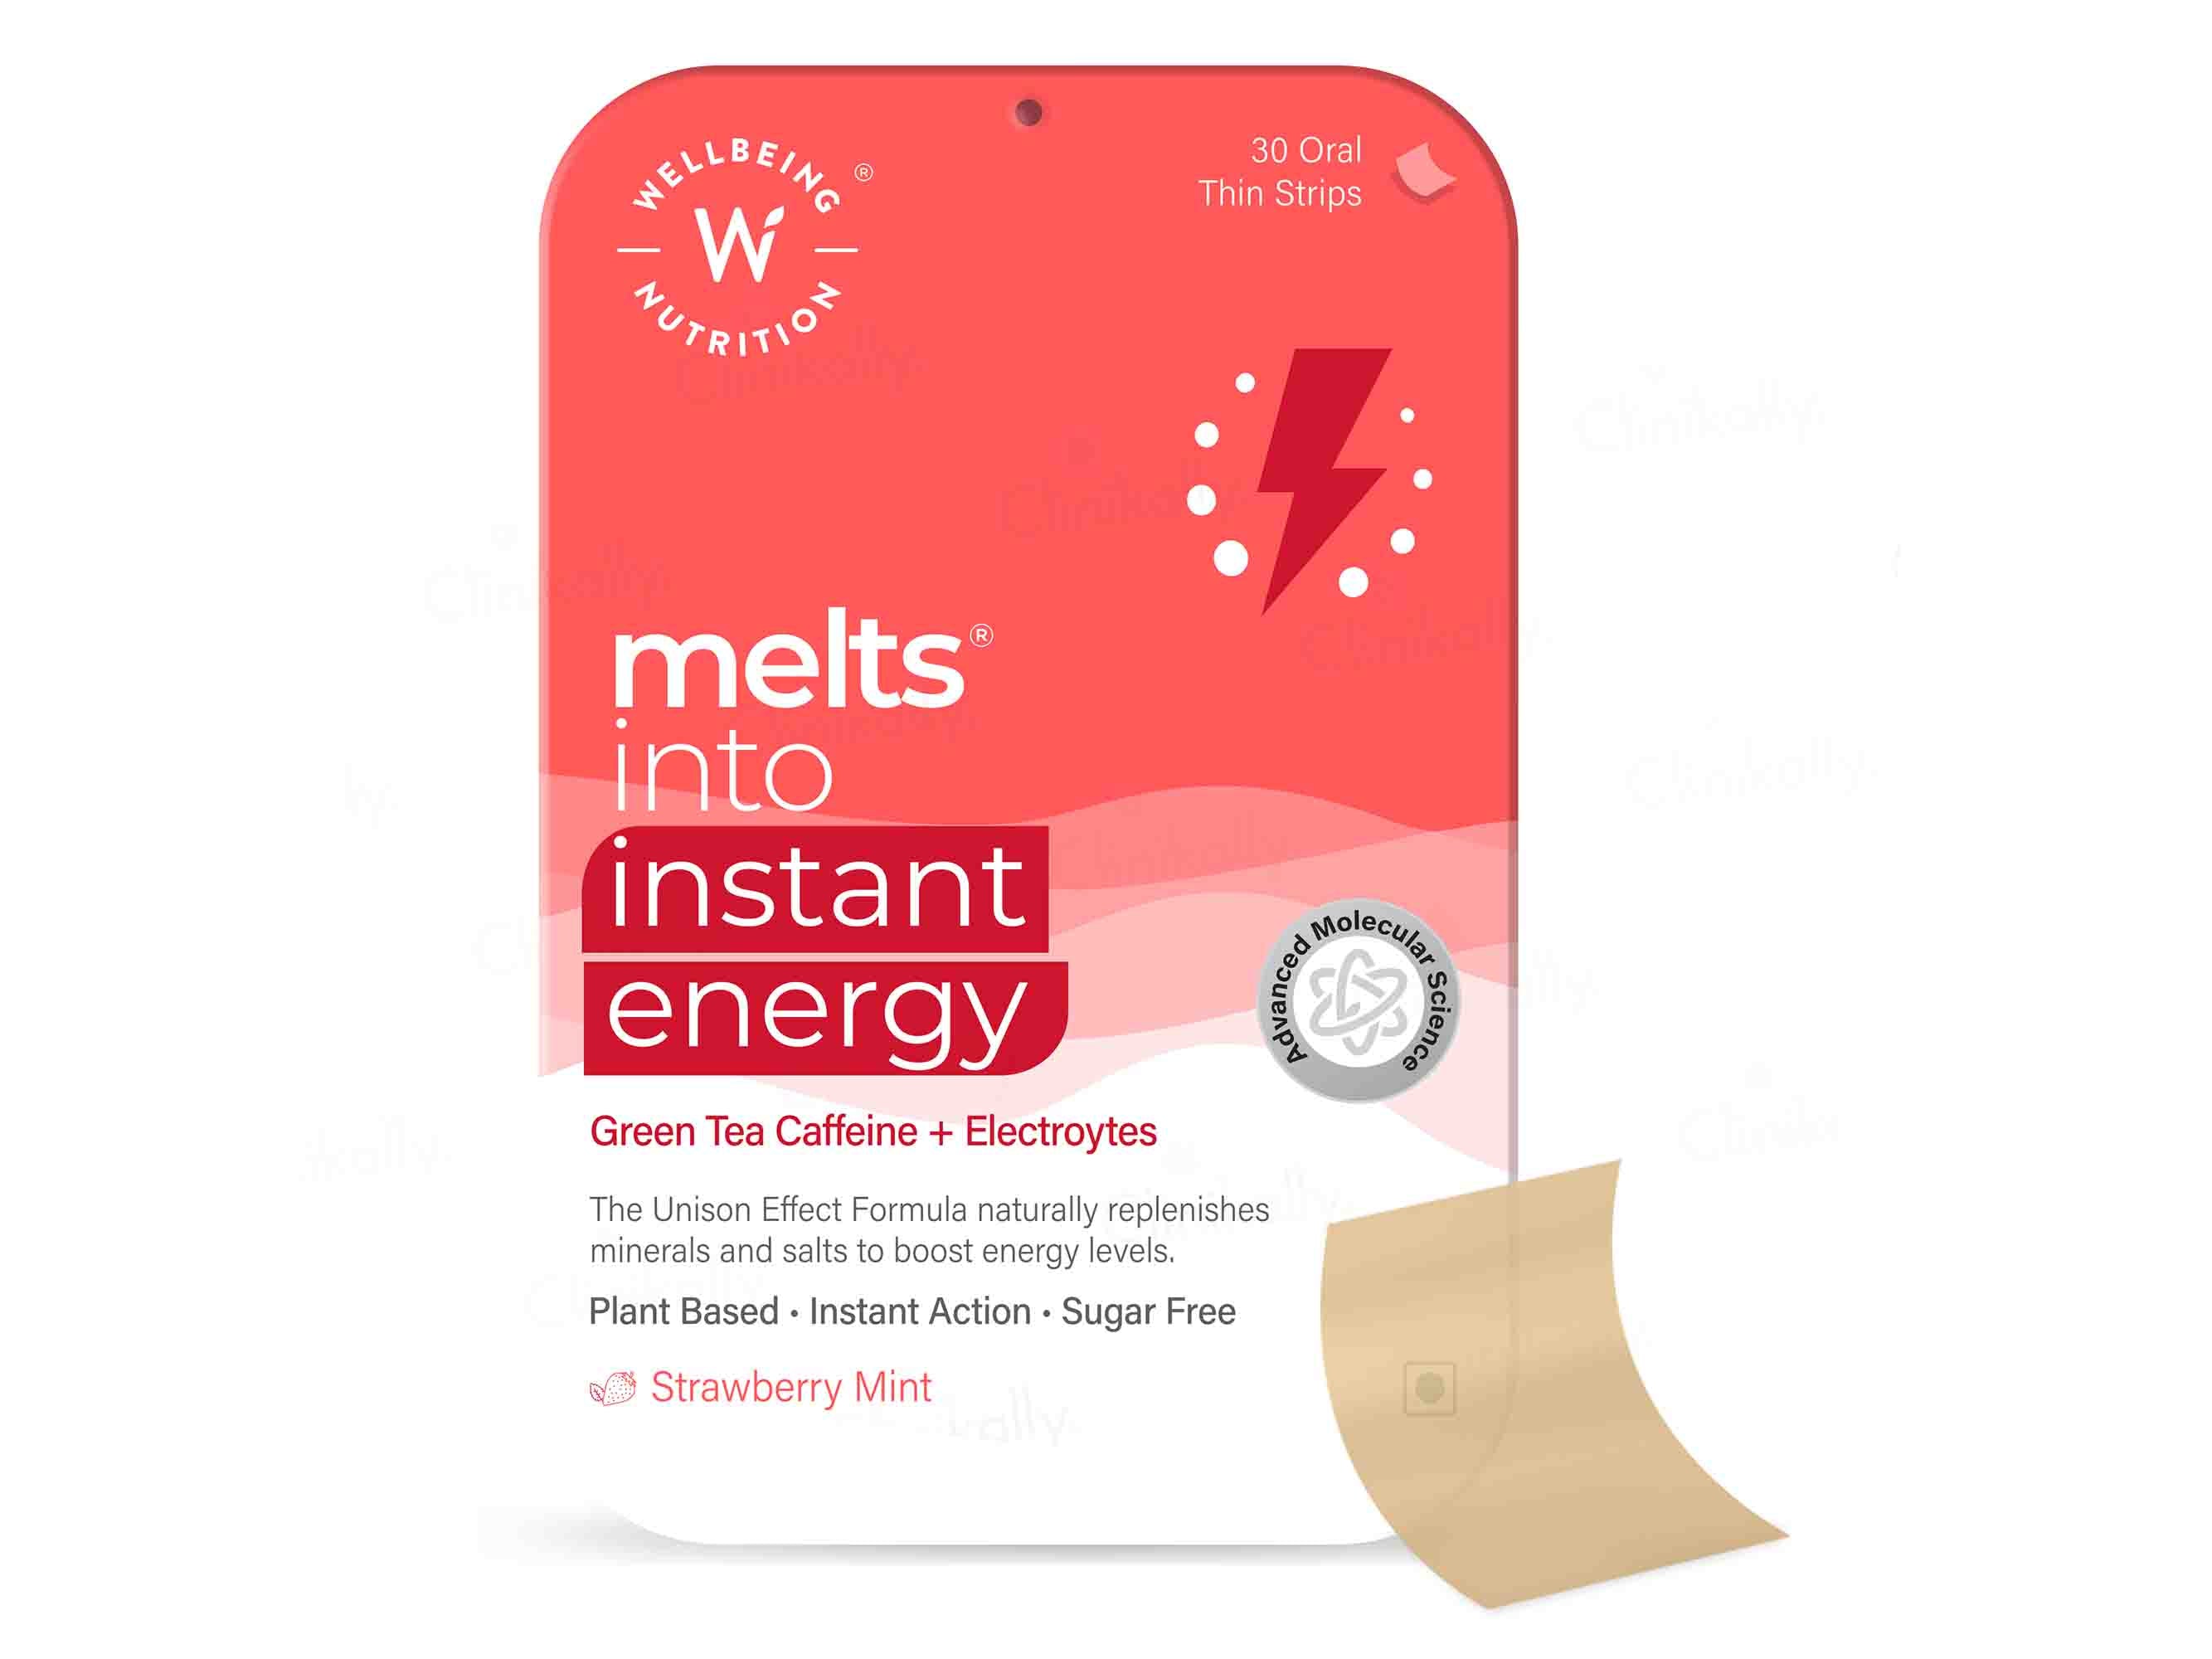 Wellbeing Nutrition Melts Into Instant Energy Oral Strip - Strawberry Mint Flavour-Clinikally